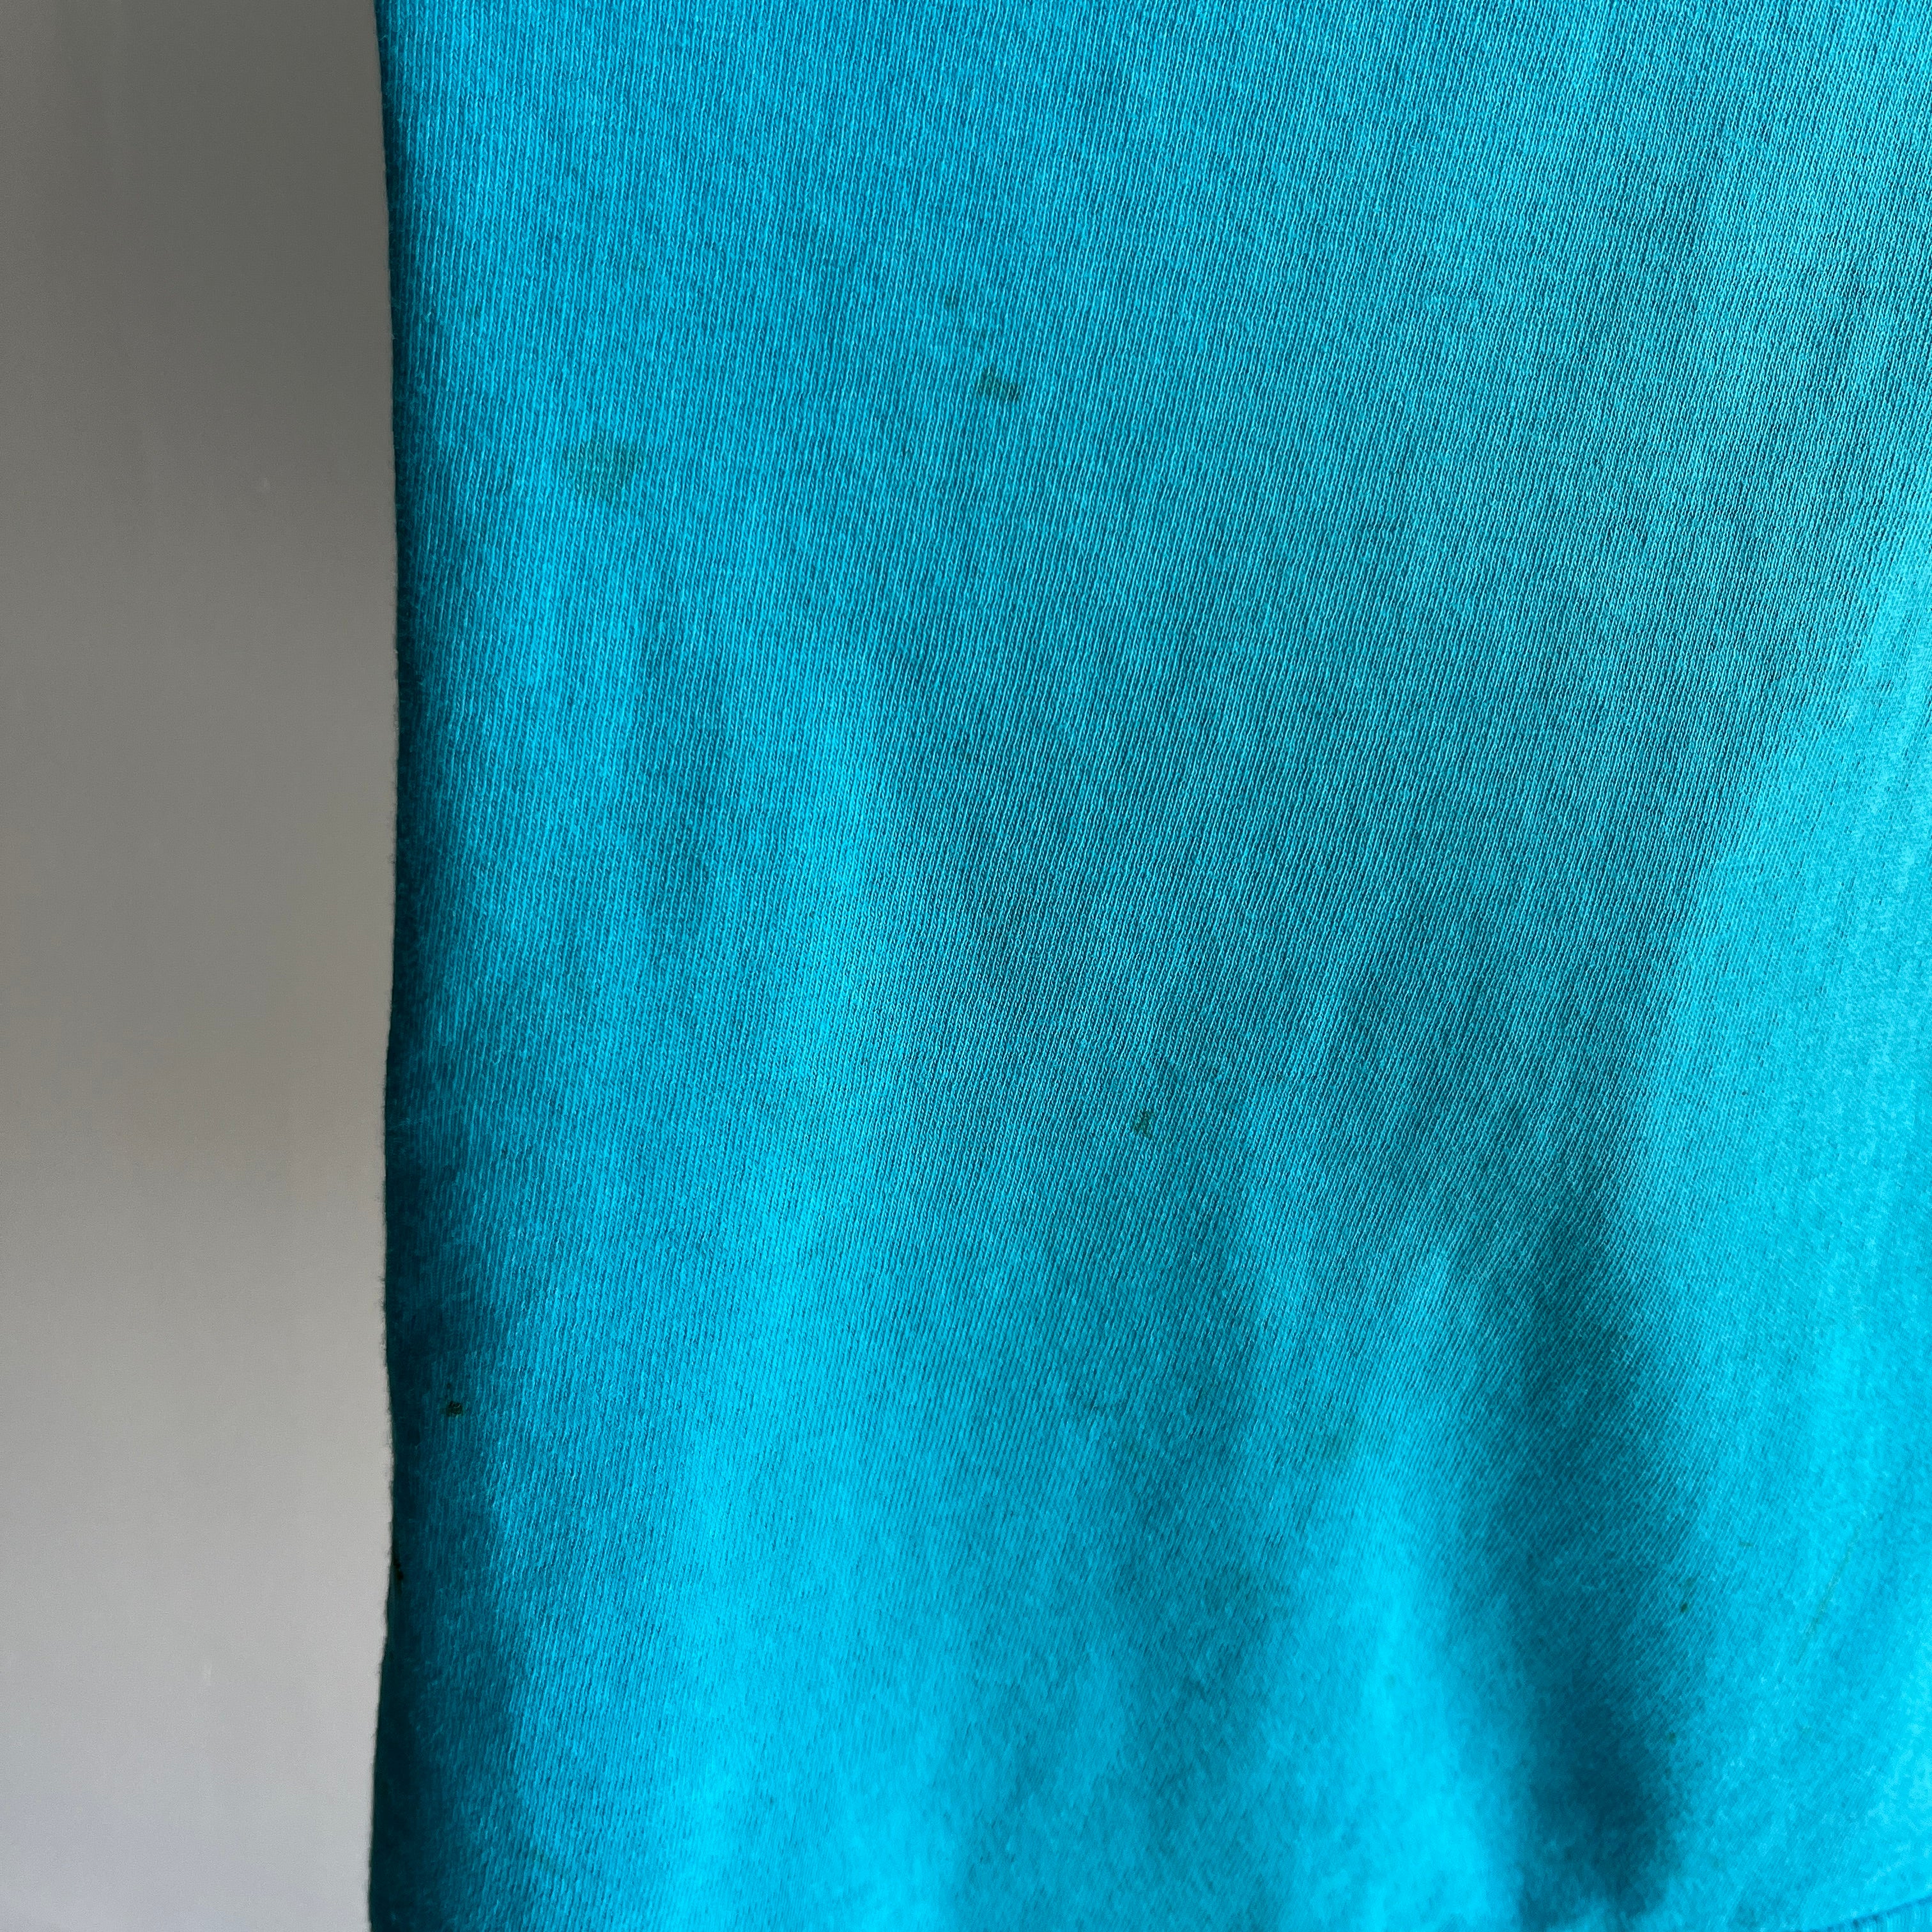 1980s Turquoise Perfectly Stained and Worn FOTL Pocket T-Shirt